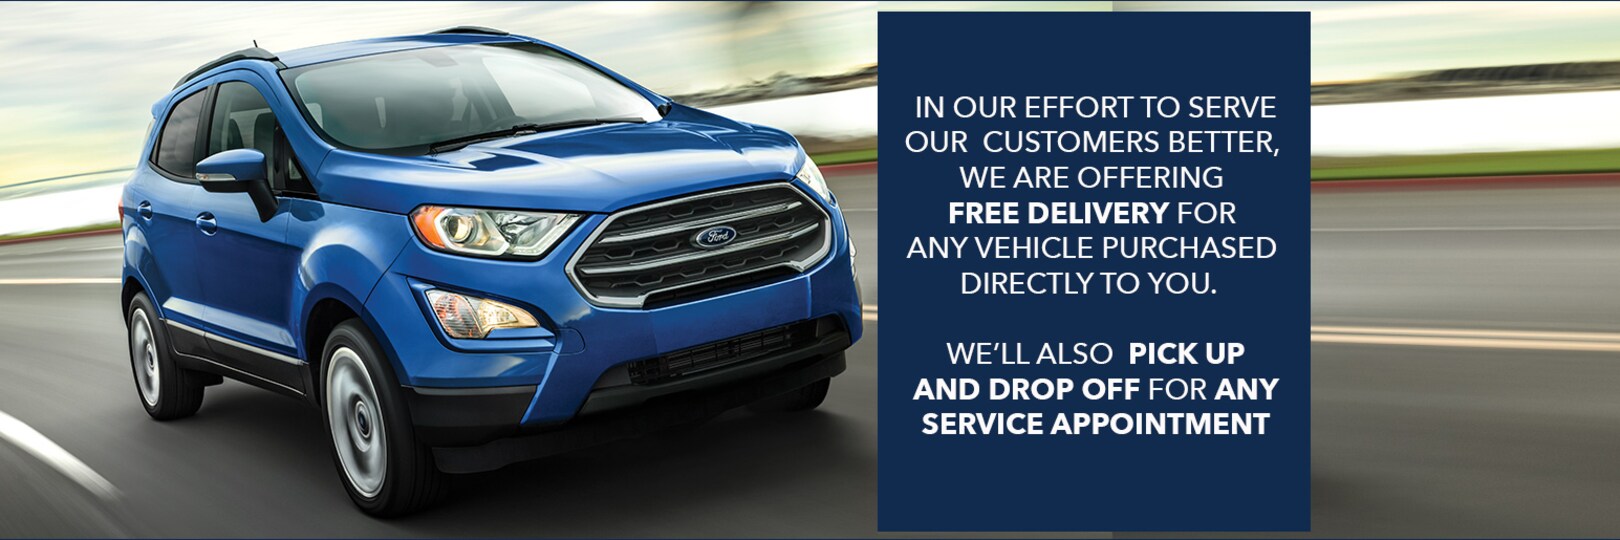 Cooper Ford | Ford Dealership in Carthage NC